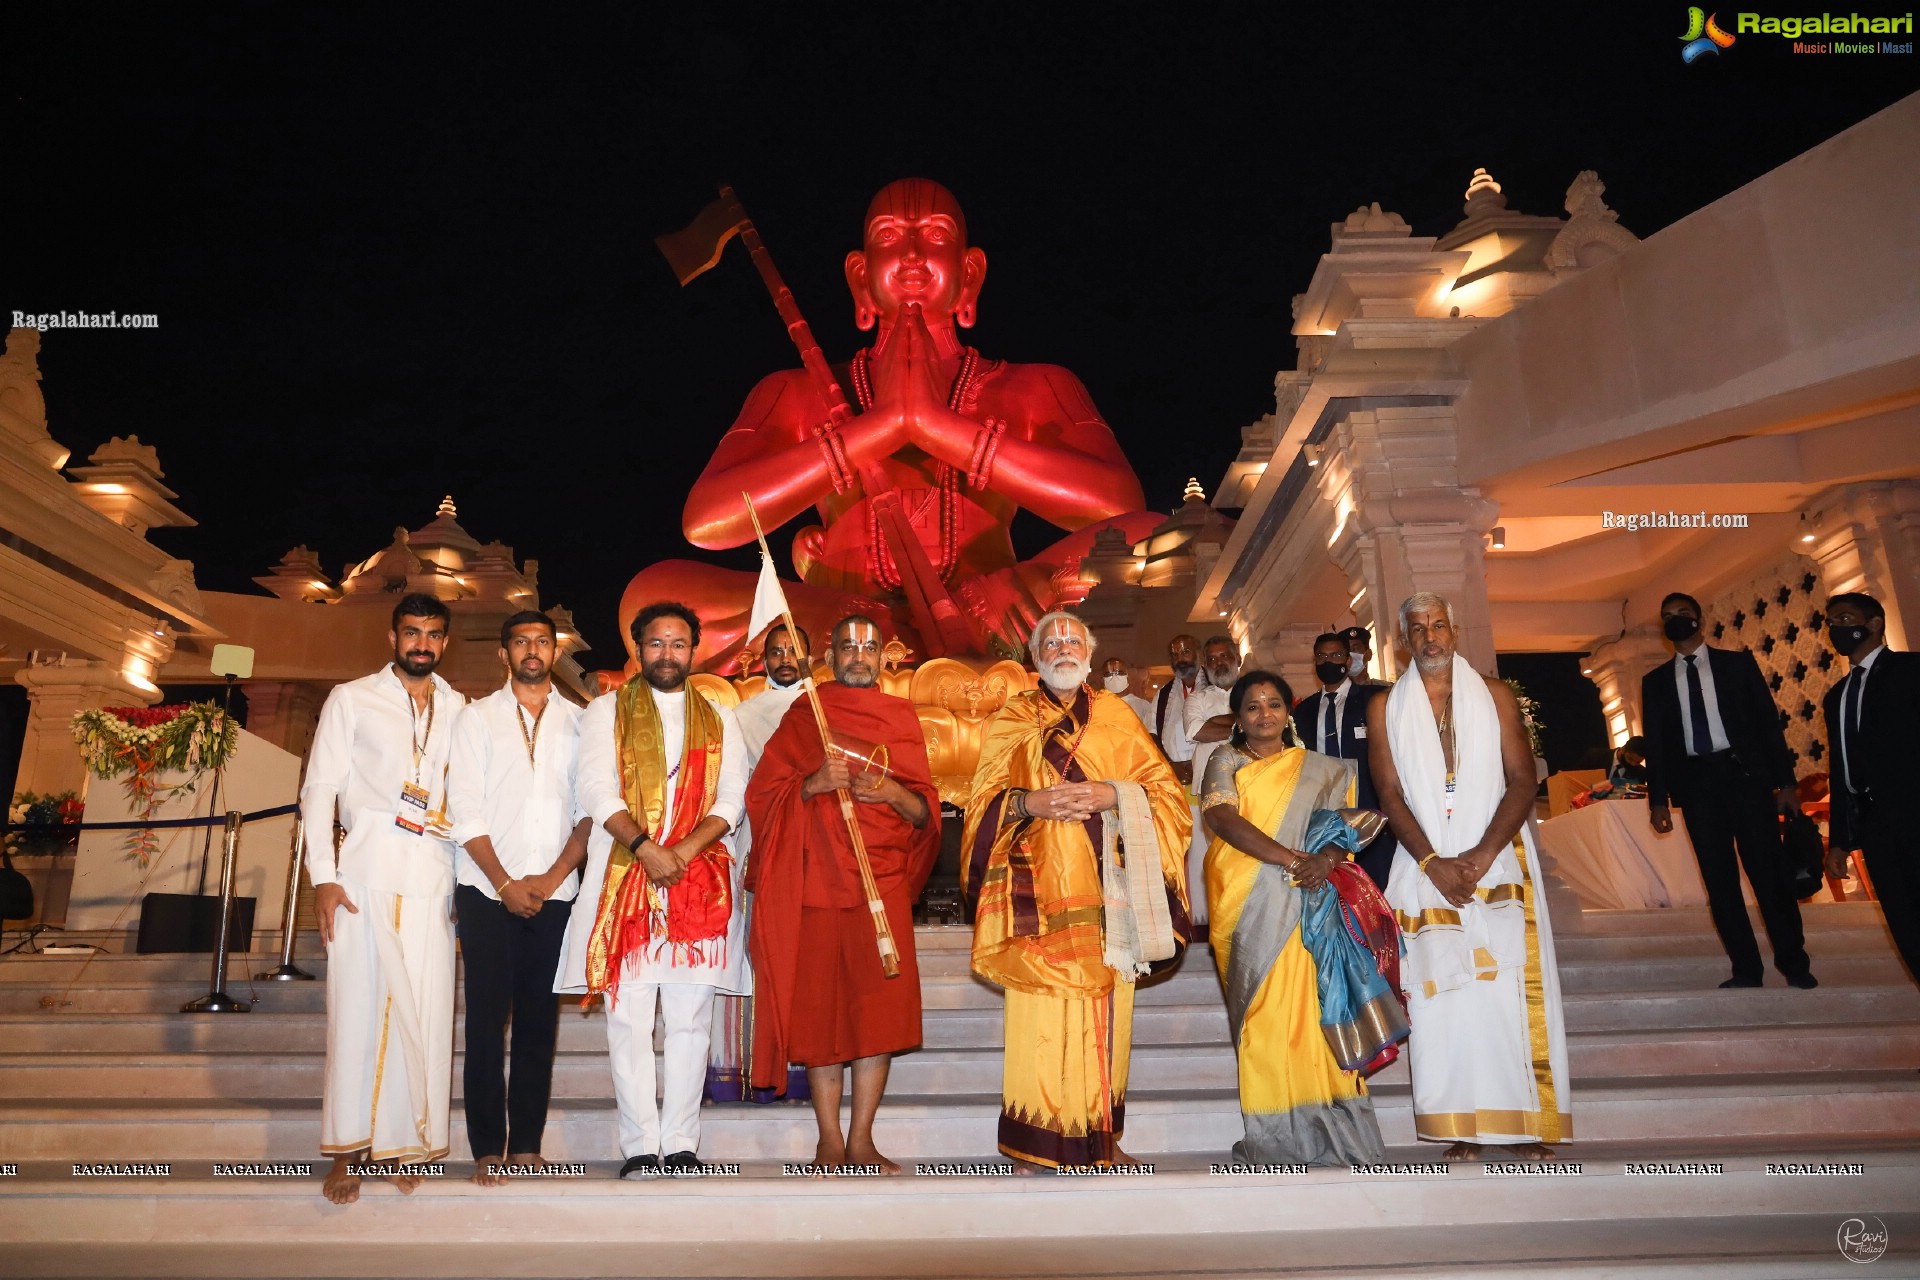 Prime Minister Inaugurates 216-Feet Tall Statue of Equality Commemorating Sri Ramanuja’s Eternal Teachings